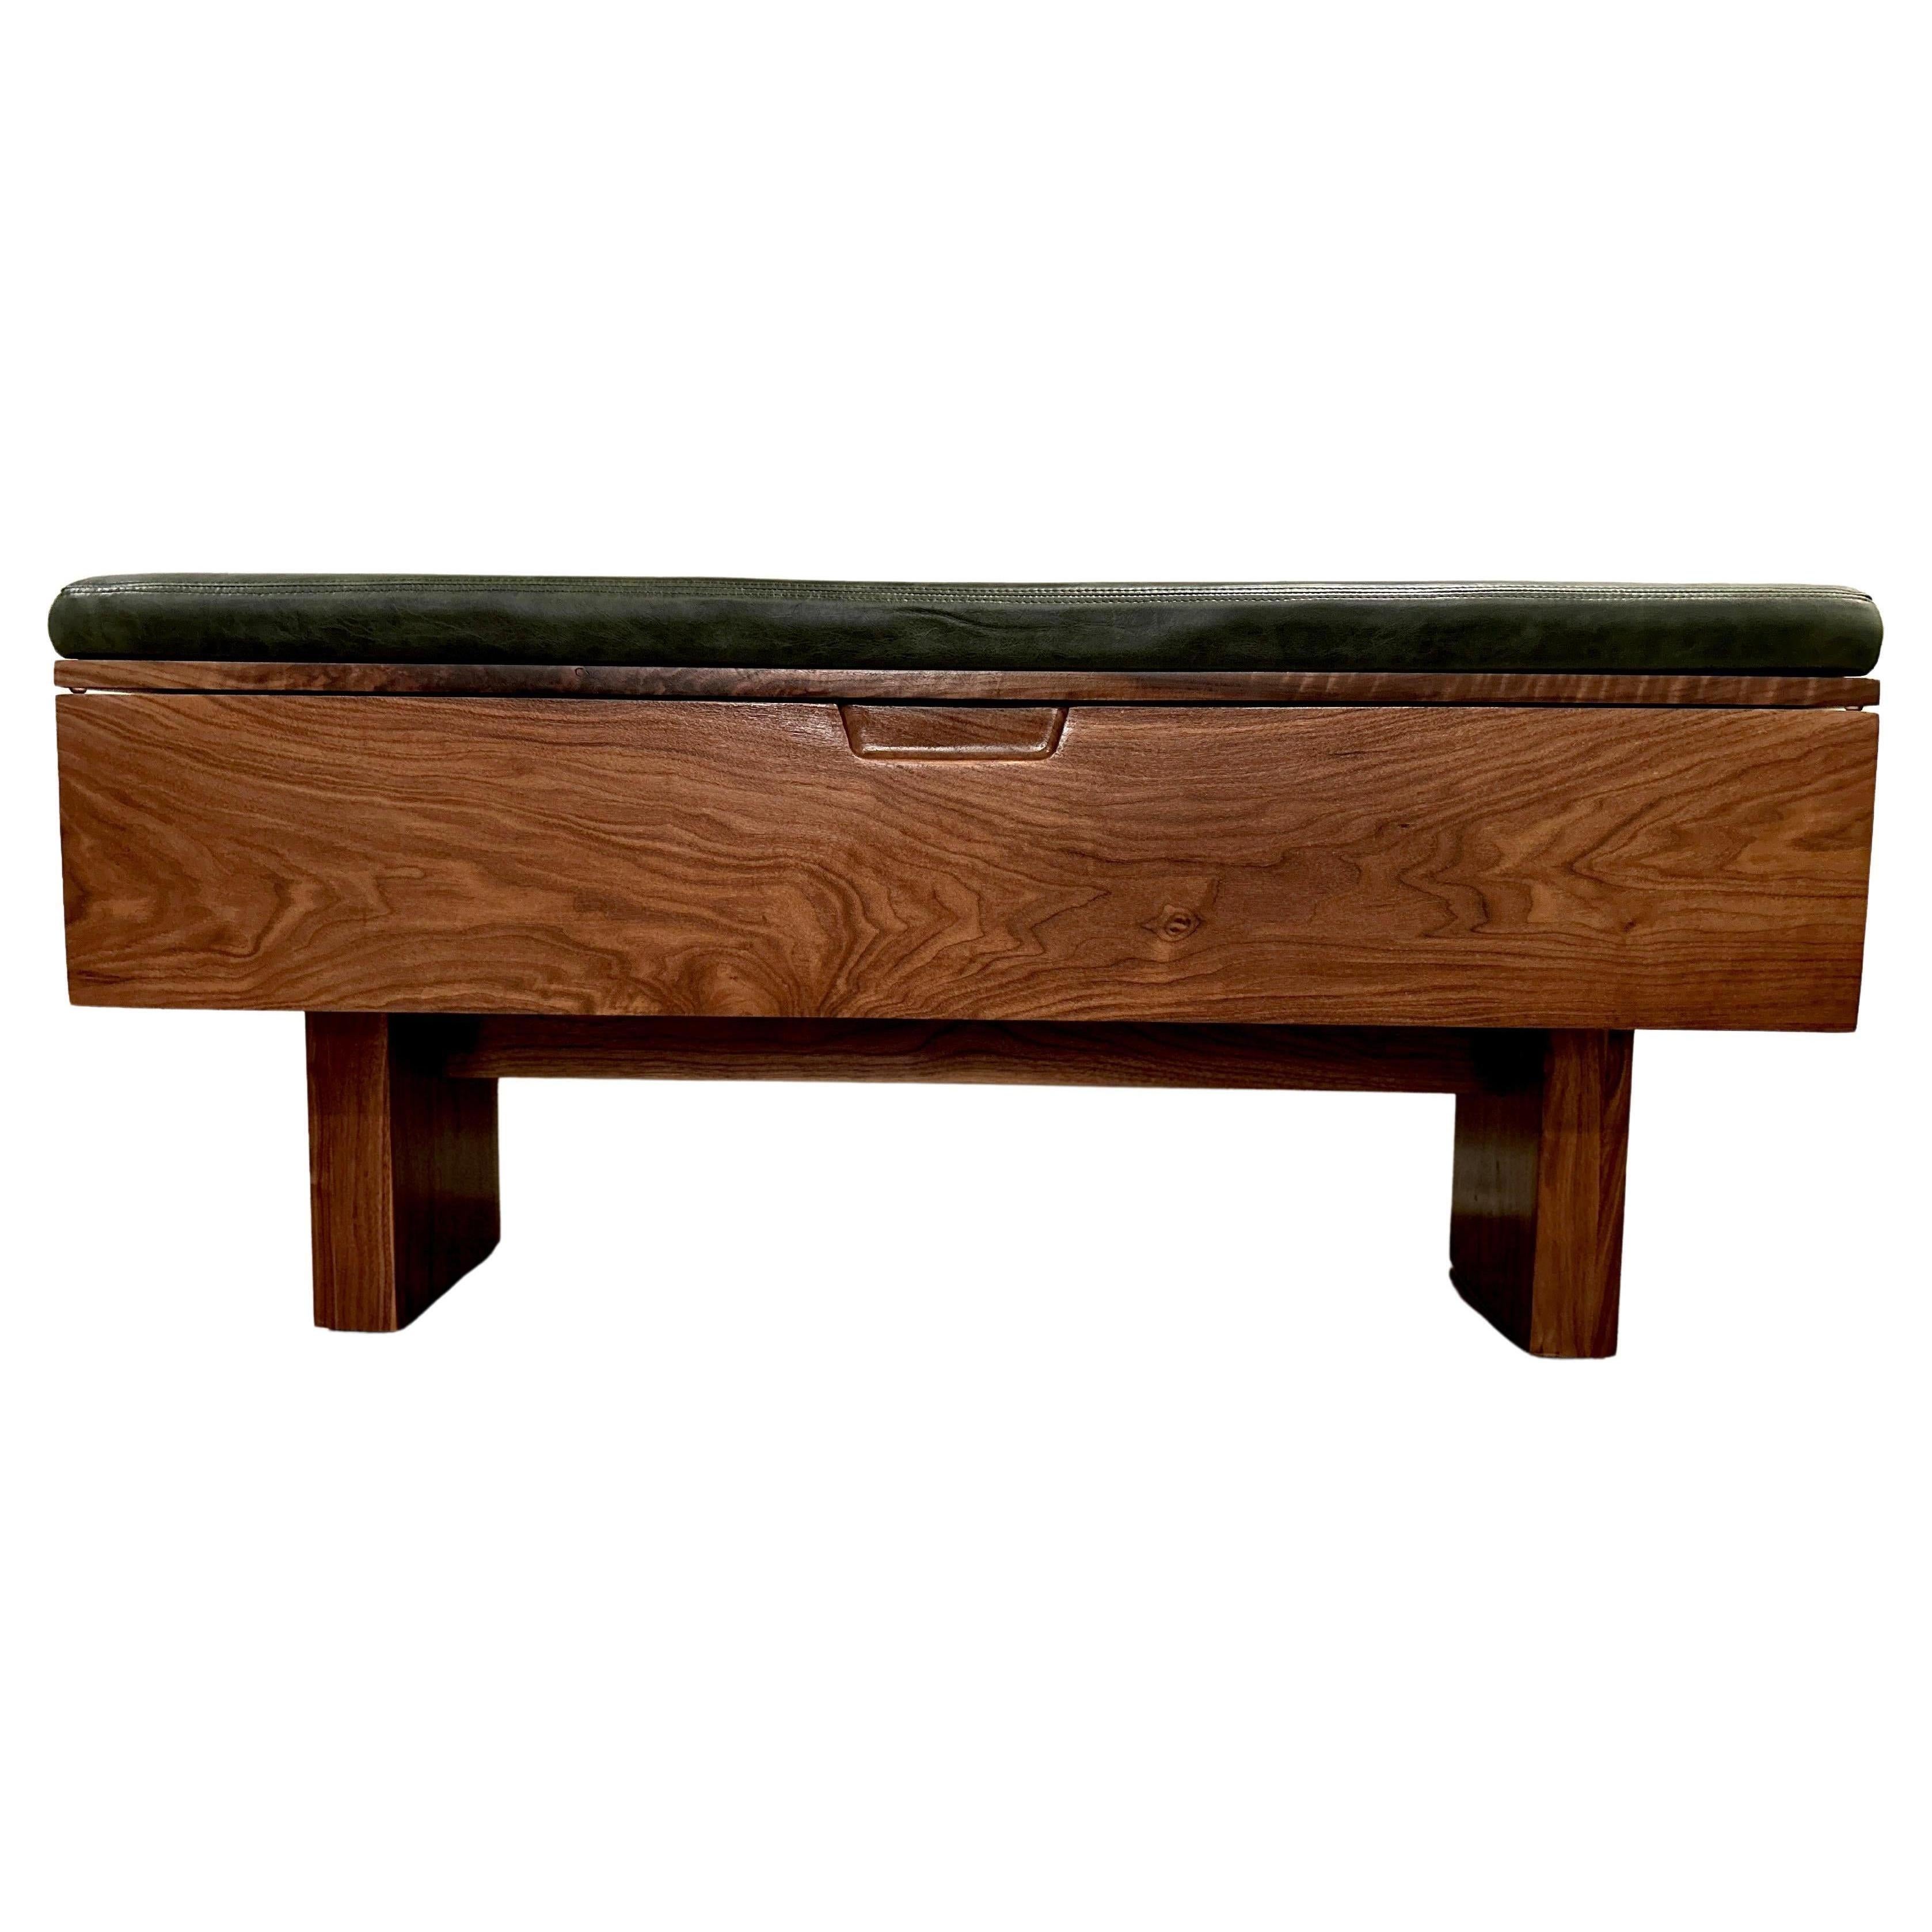 21st Century Modern Walnut Bench with Leather Upholstered Seat Cushion For Sale